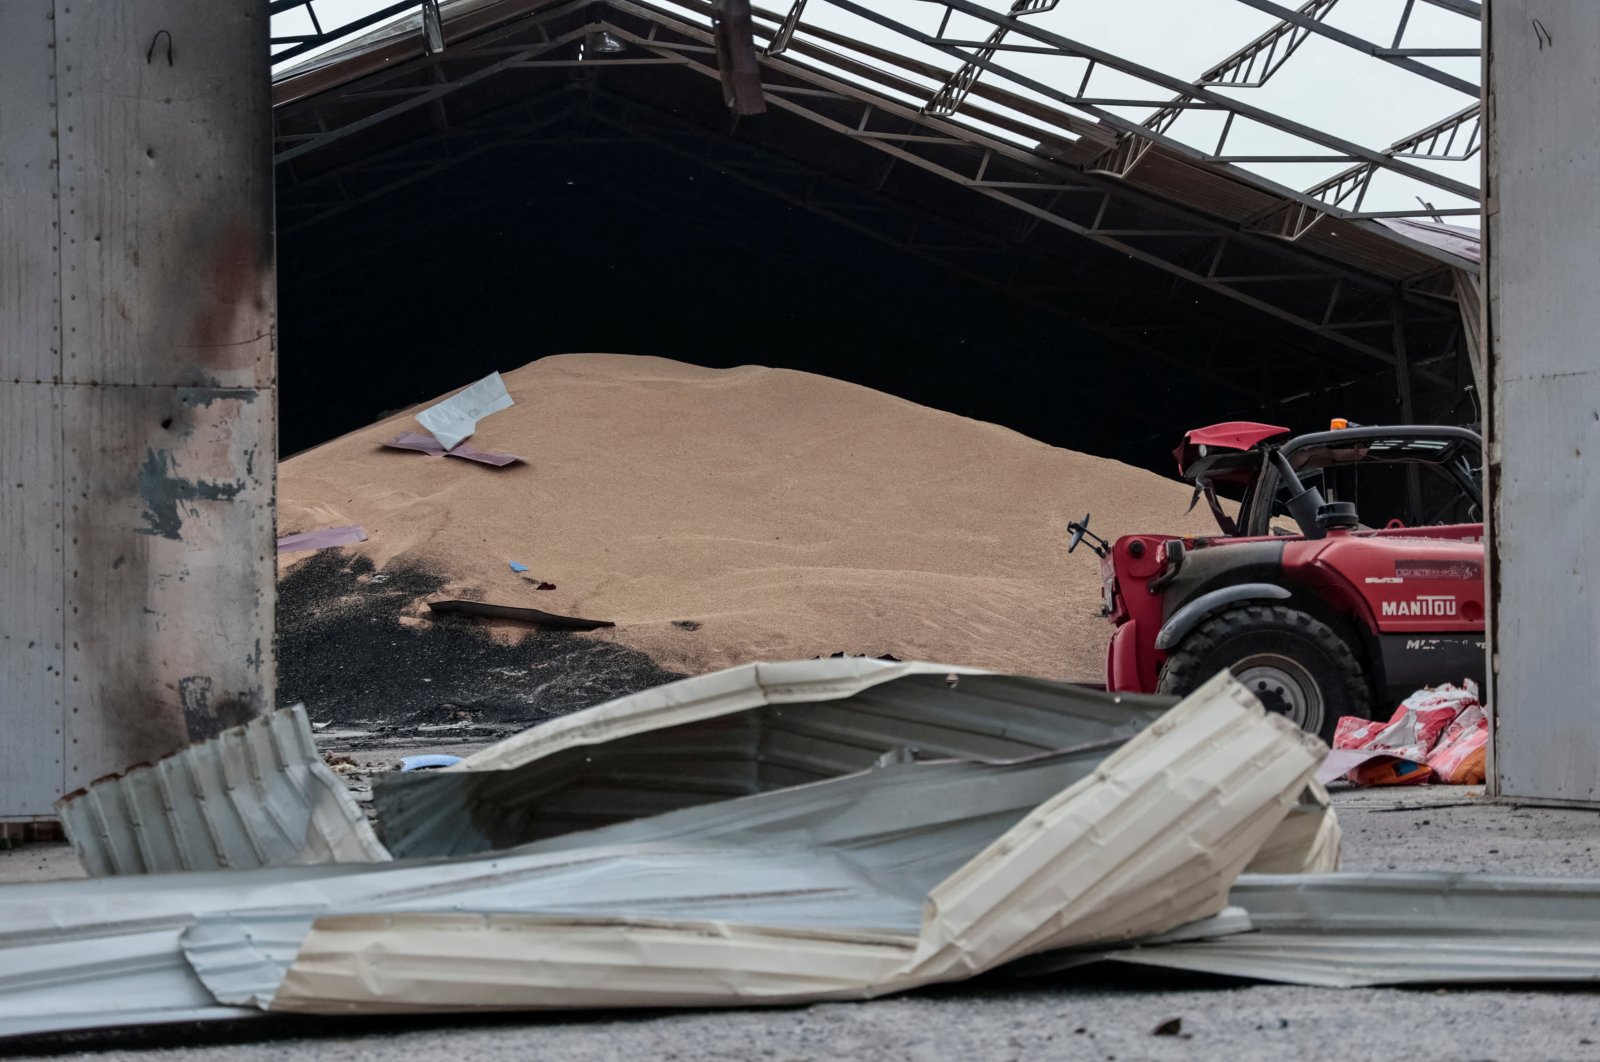 Seeds are seen in grain silos destroyed after it was shelled repeatedly, amid Russia&#039;s invasion of Ukraine, in the Donetsk region, Ukraine, May 31, 2022. (Reuters Photo)